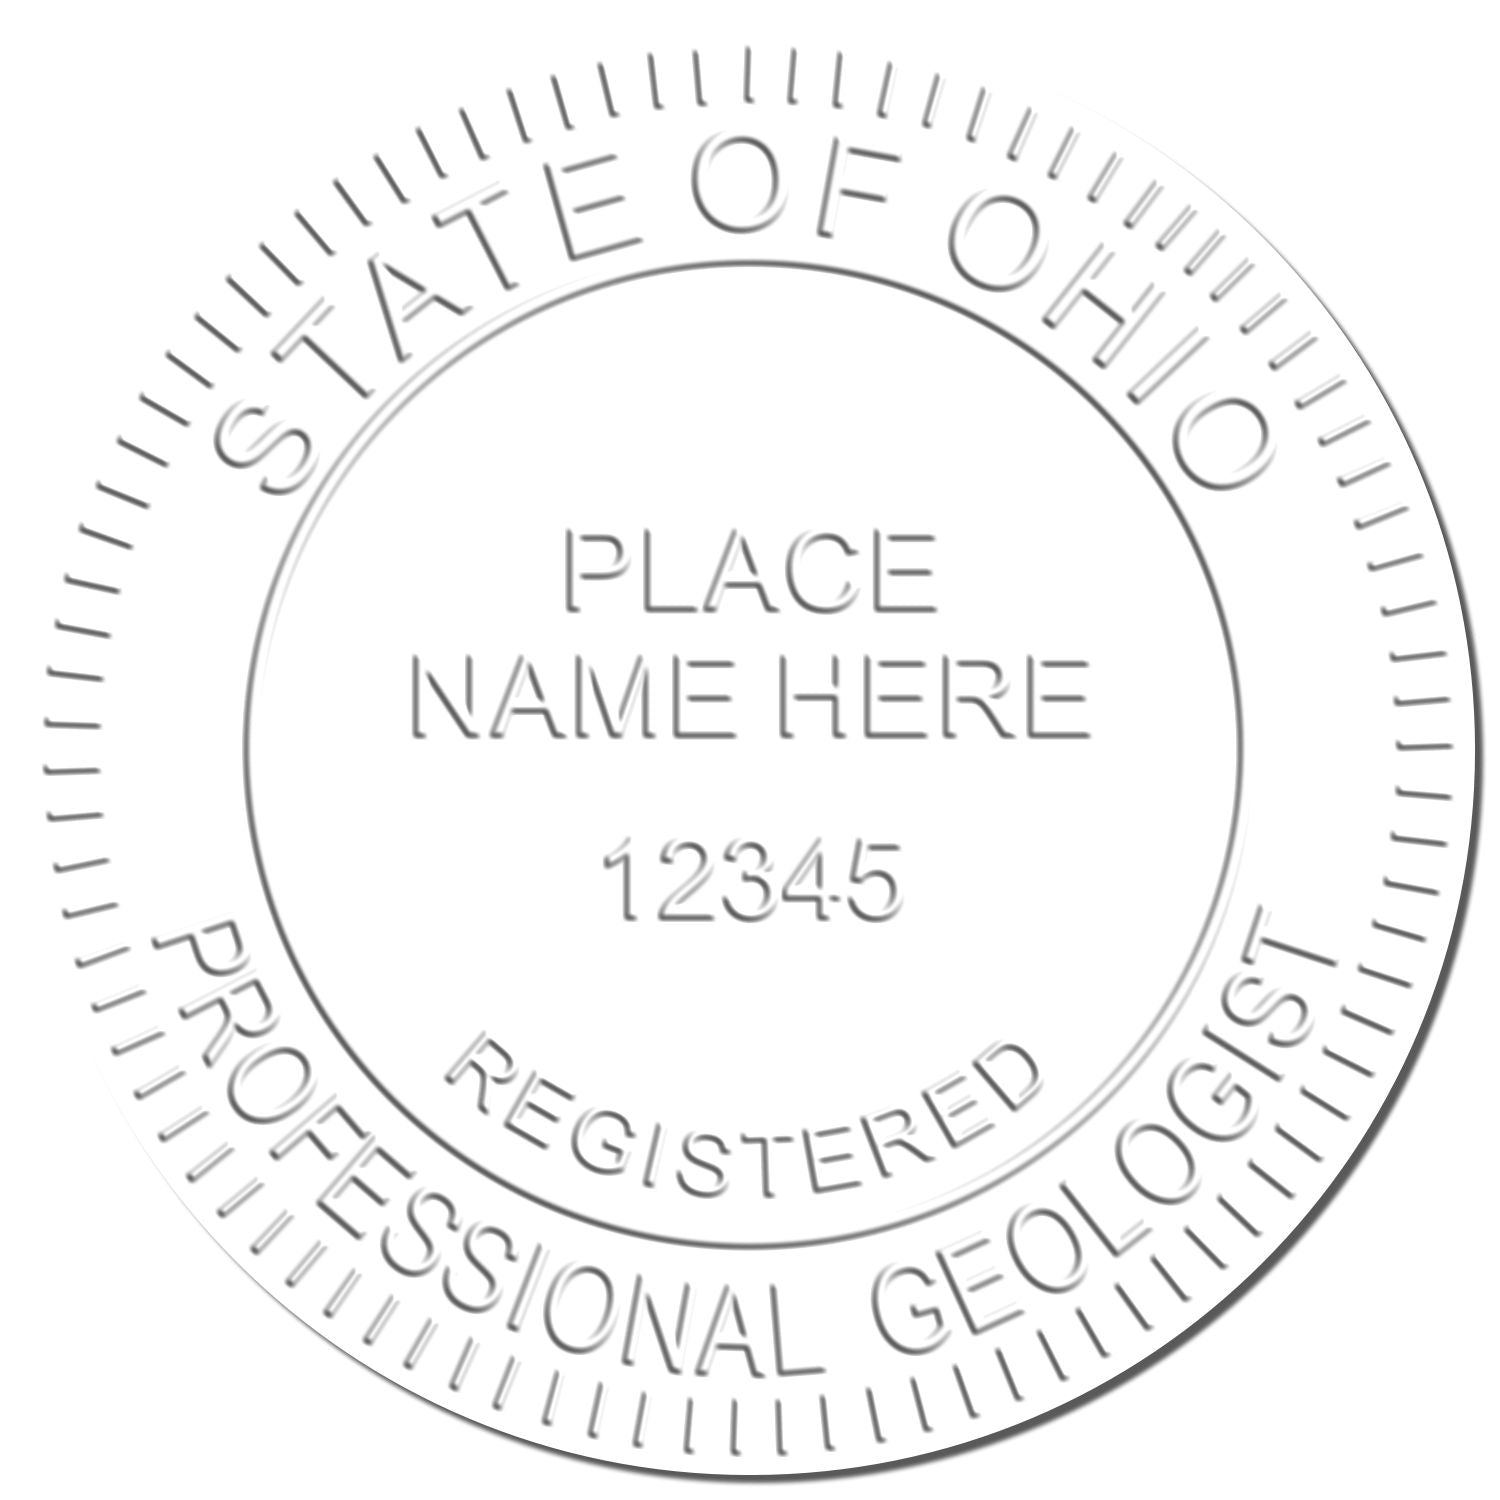 The Ohio Geologist Desk Seal stamp impression comes to life with a crisp, detailed image stamped on paper - showcasing true professional quality.